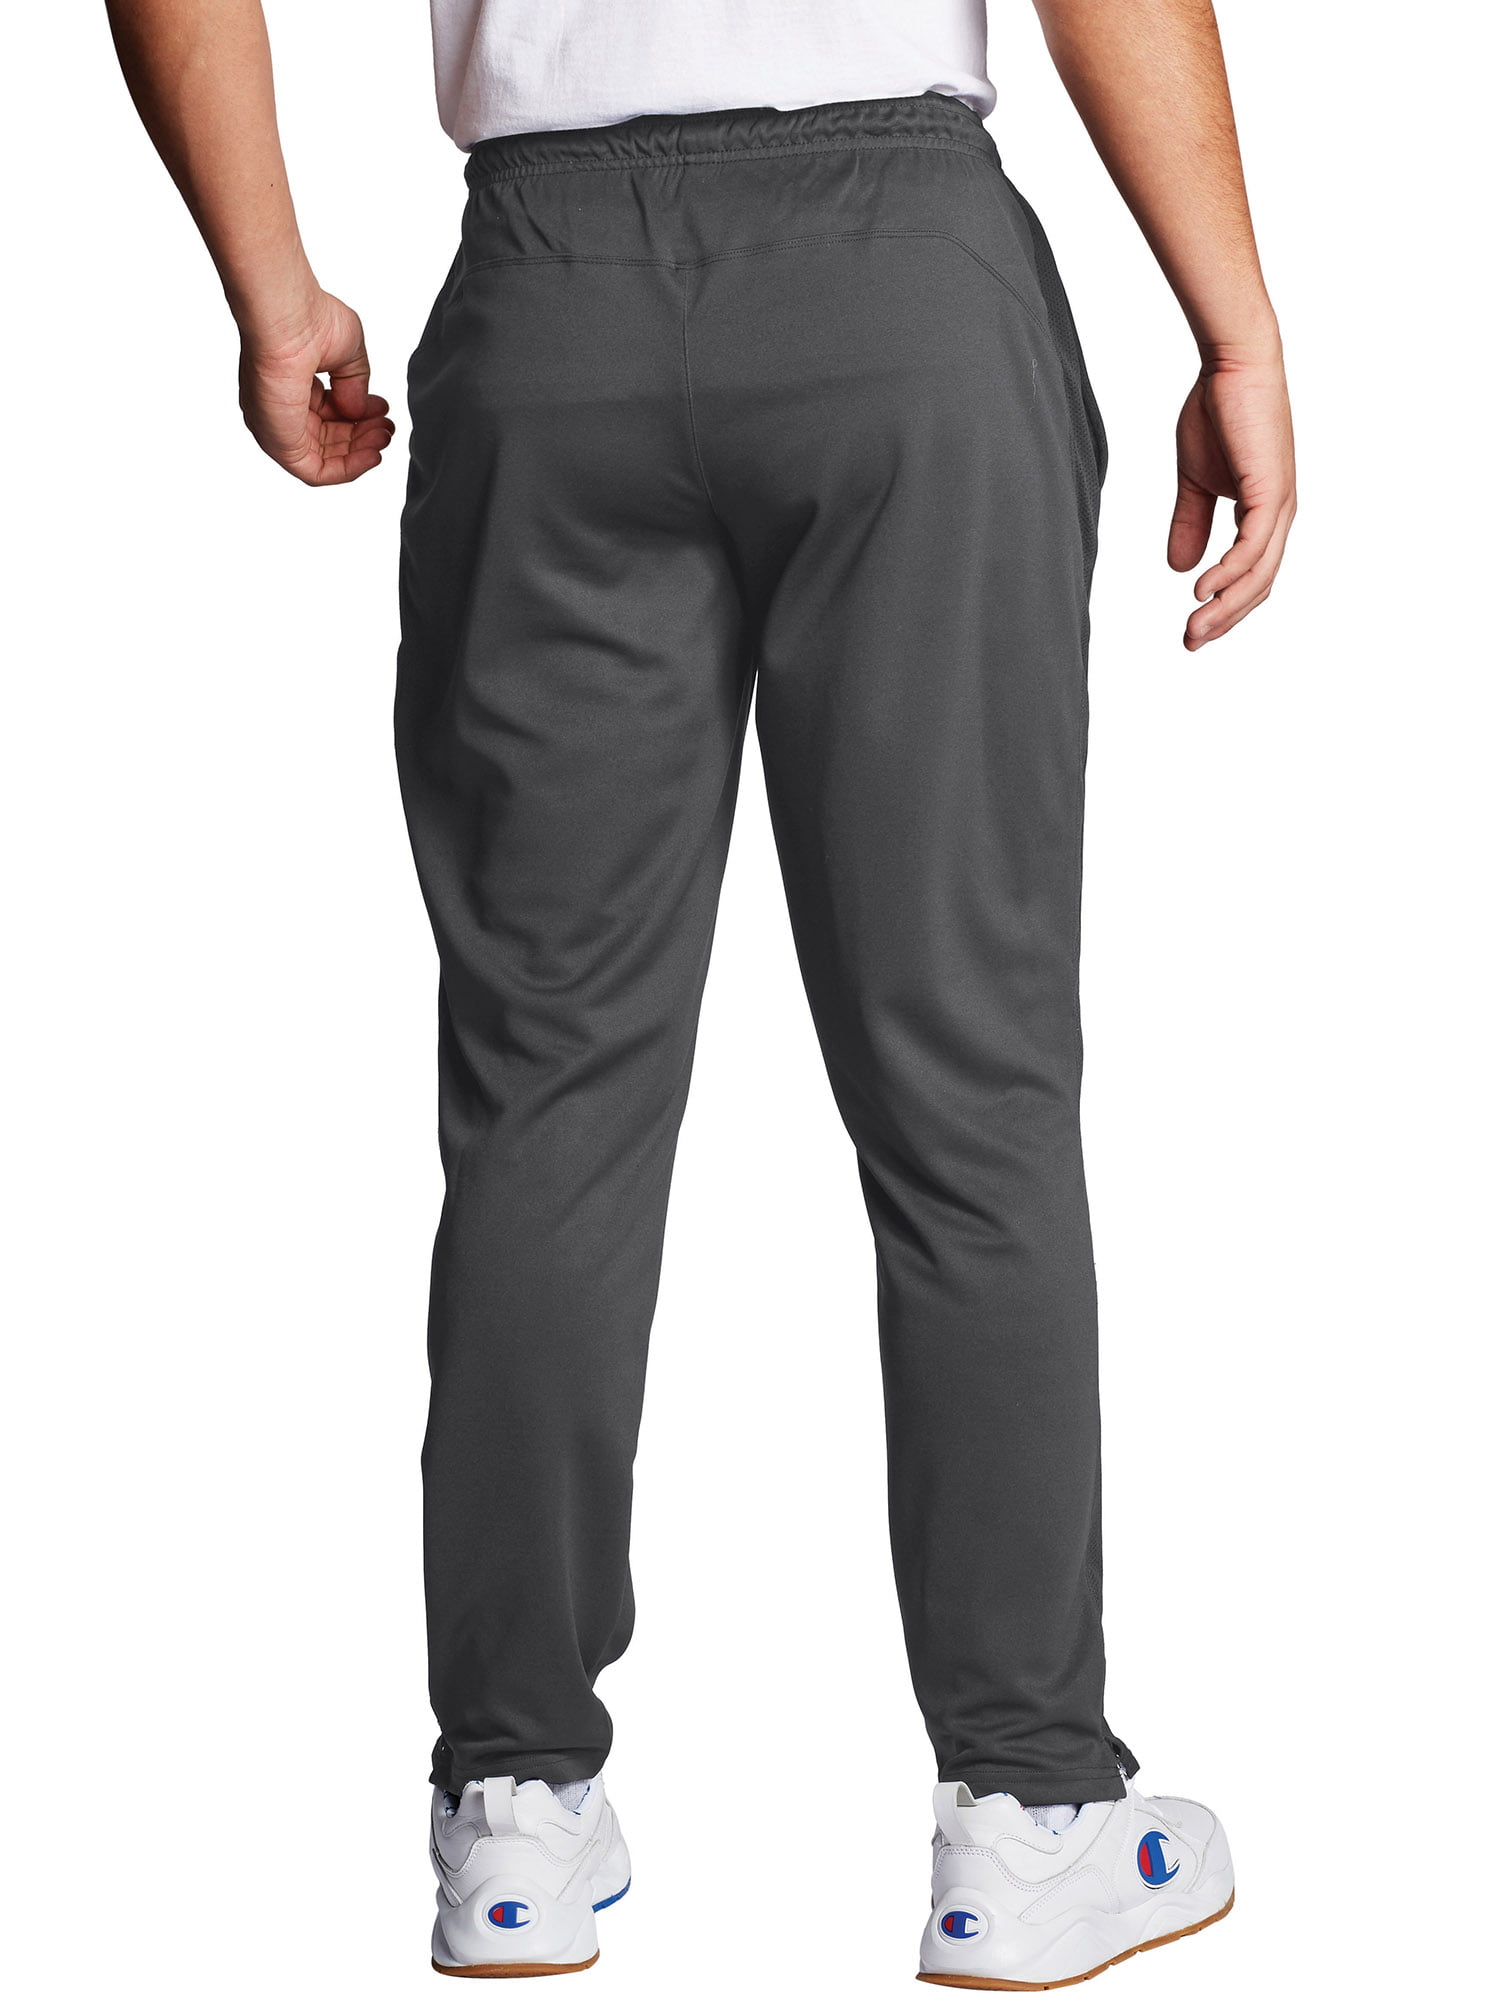 Double Dry Select Training Pants 